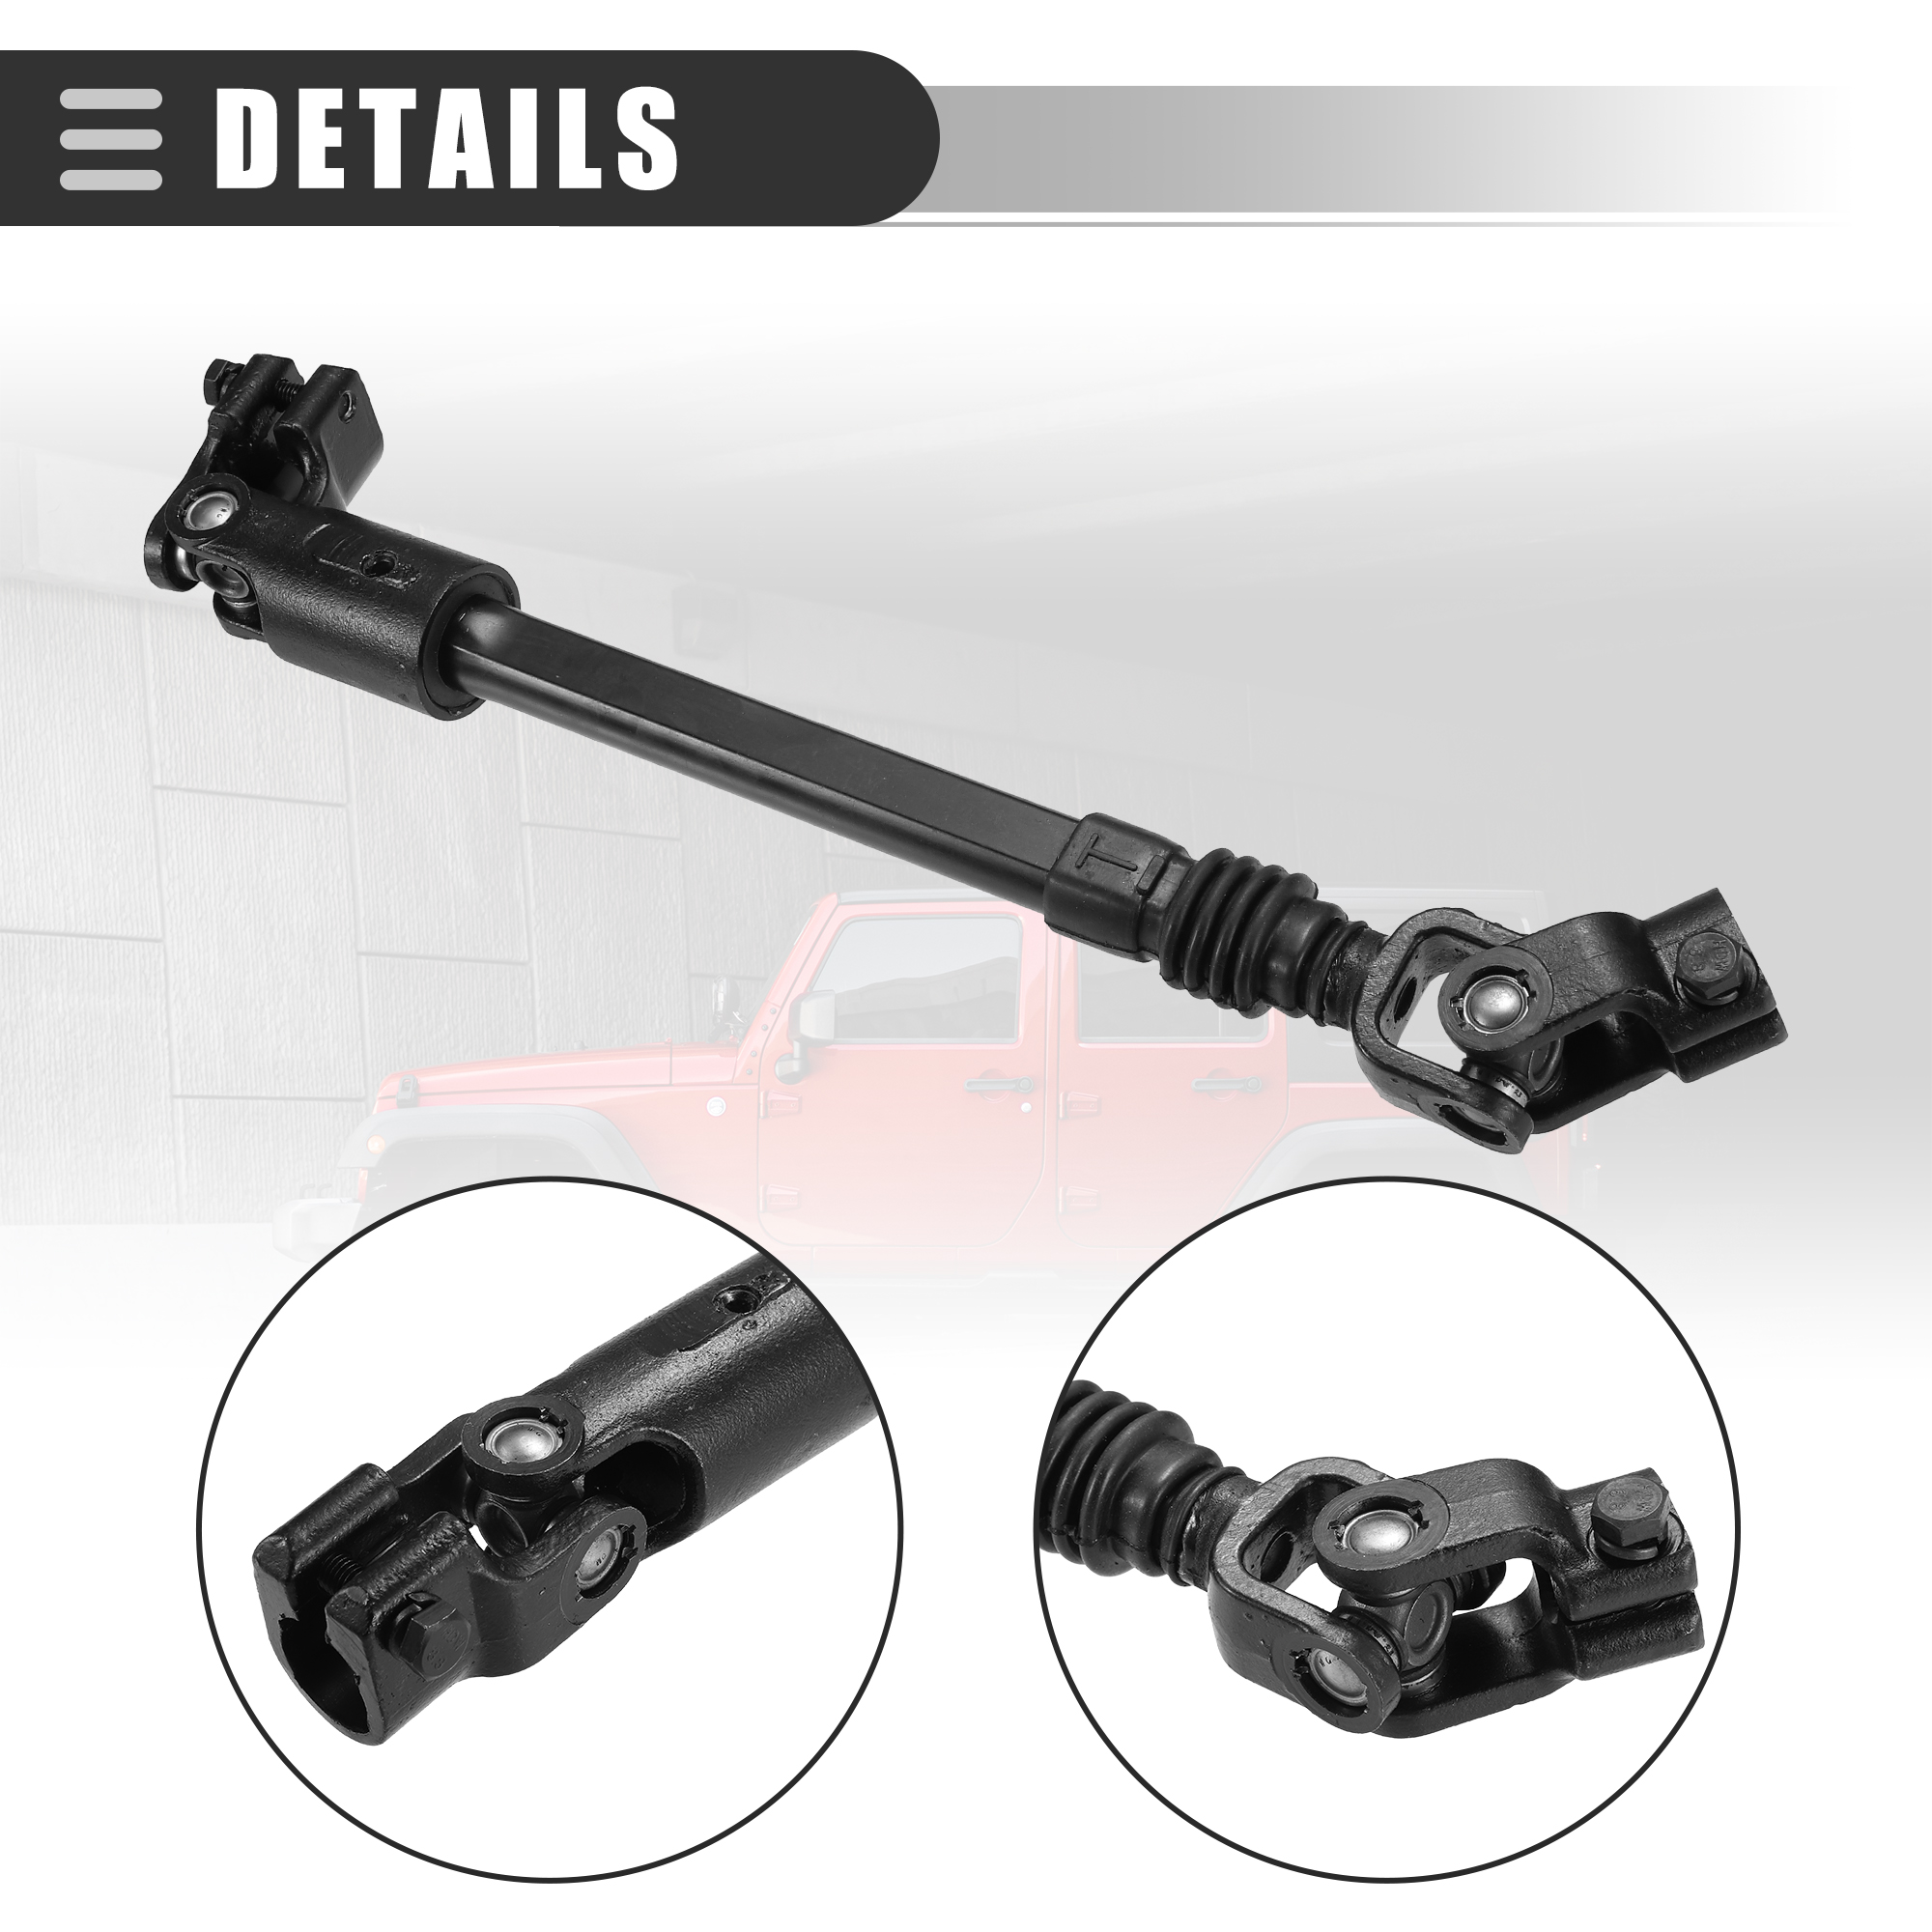 Unique Bargains Lower Power Steering Shaft Fit for Jeep Cherokee 1984-1994 No.4713943 Black